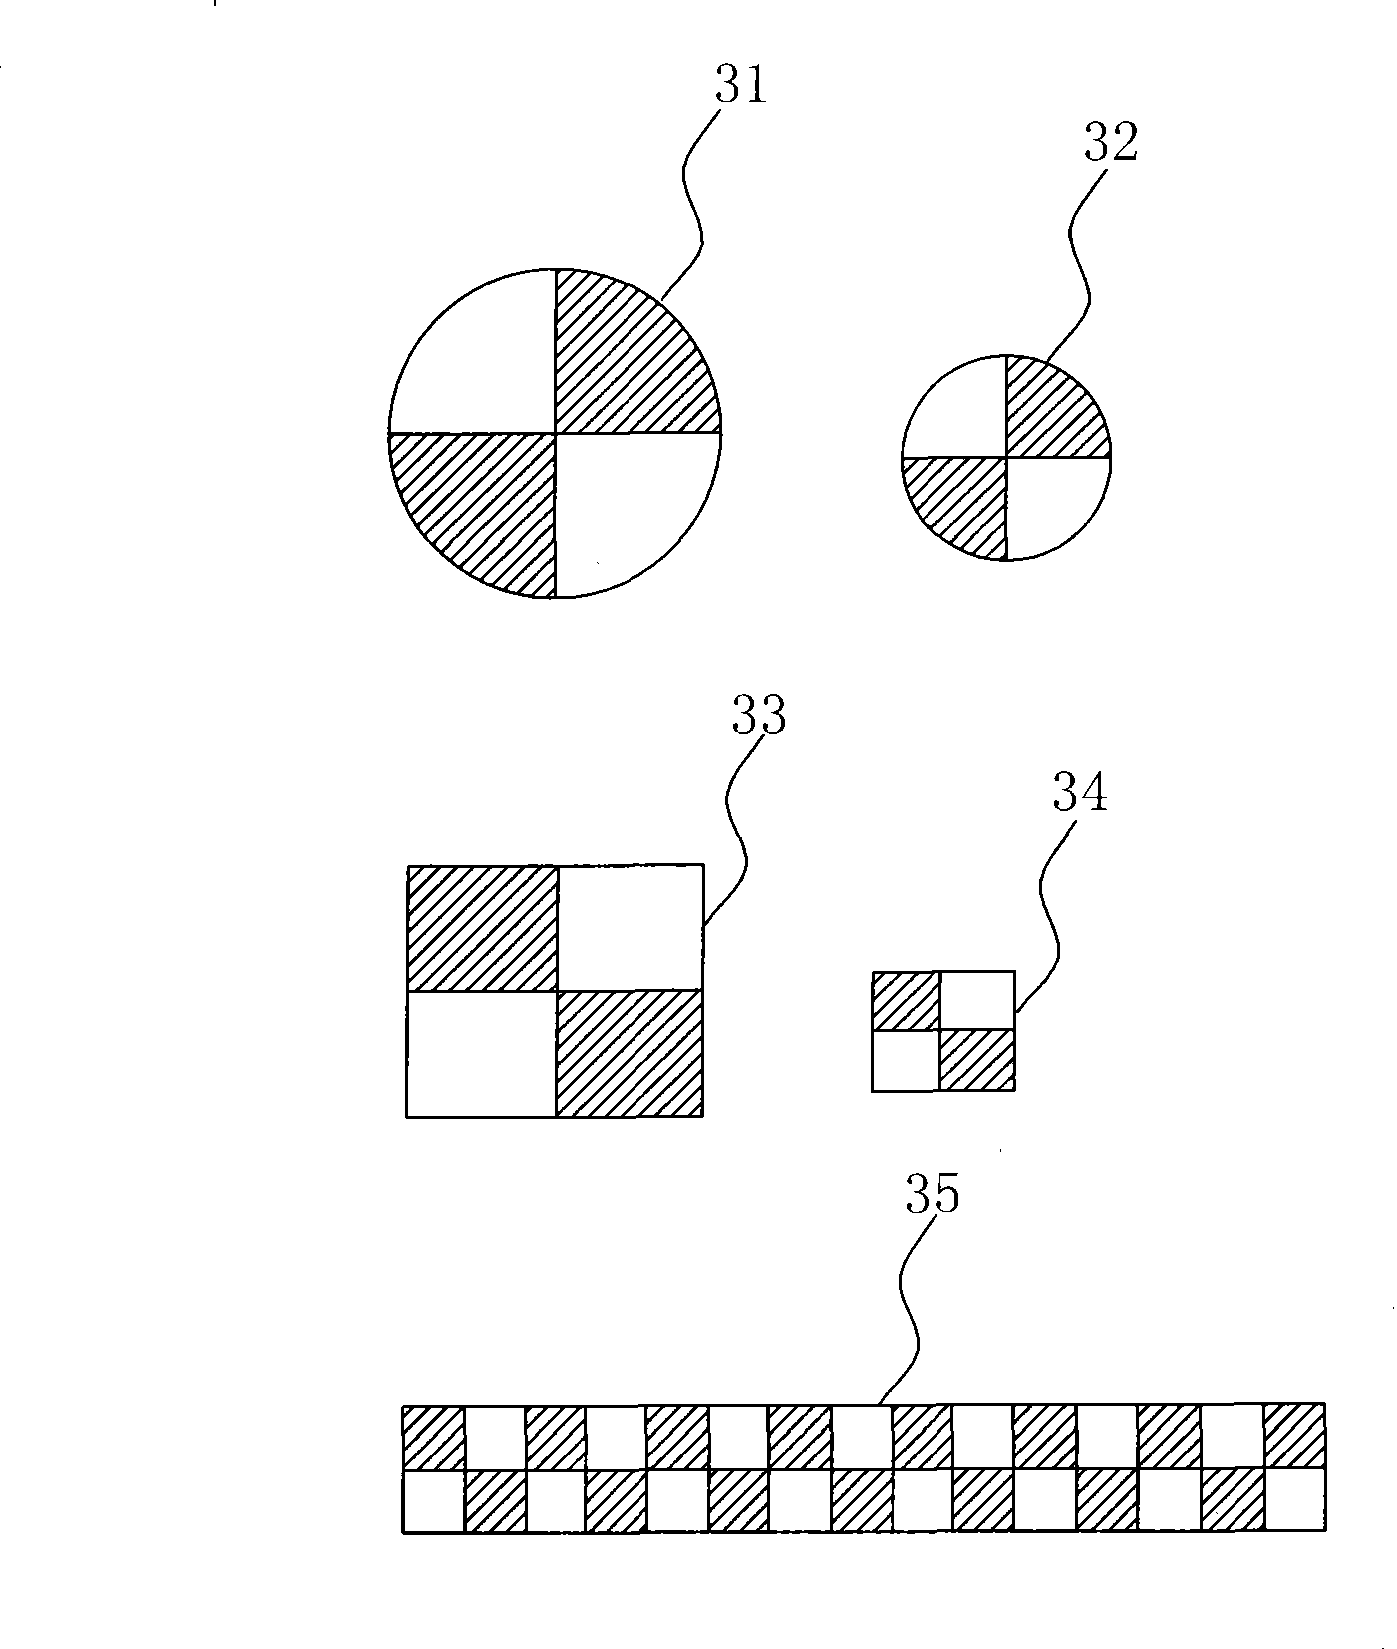 Vehicle component real object collision sequence image analysis method and its analysis system